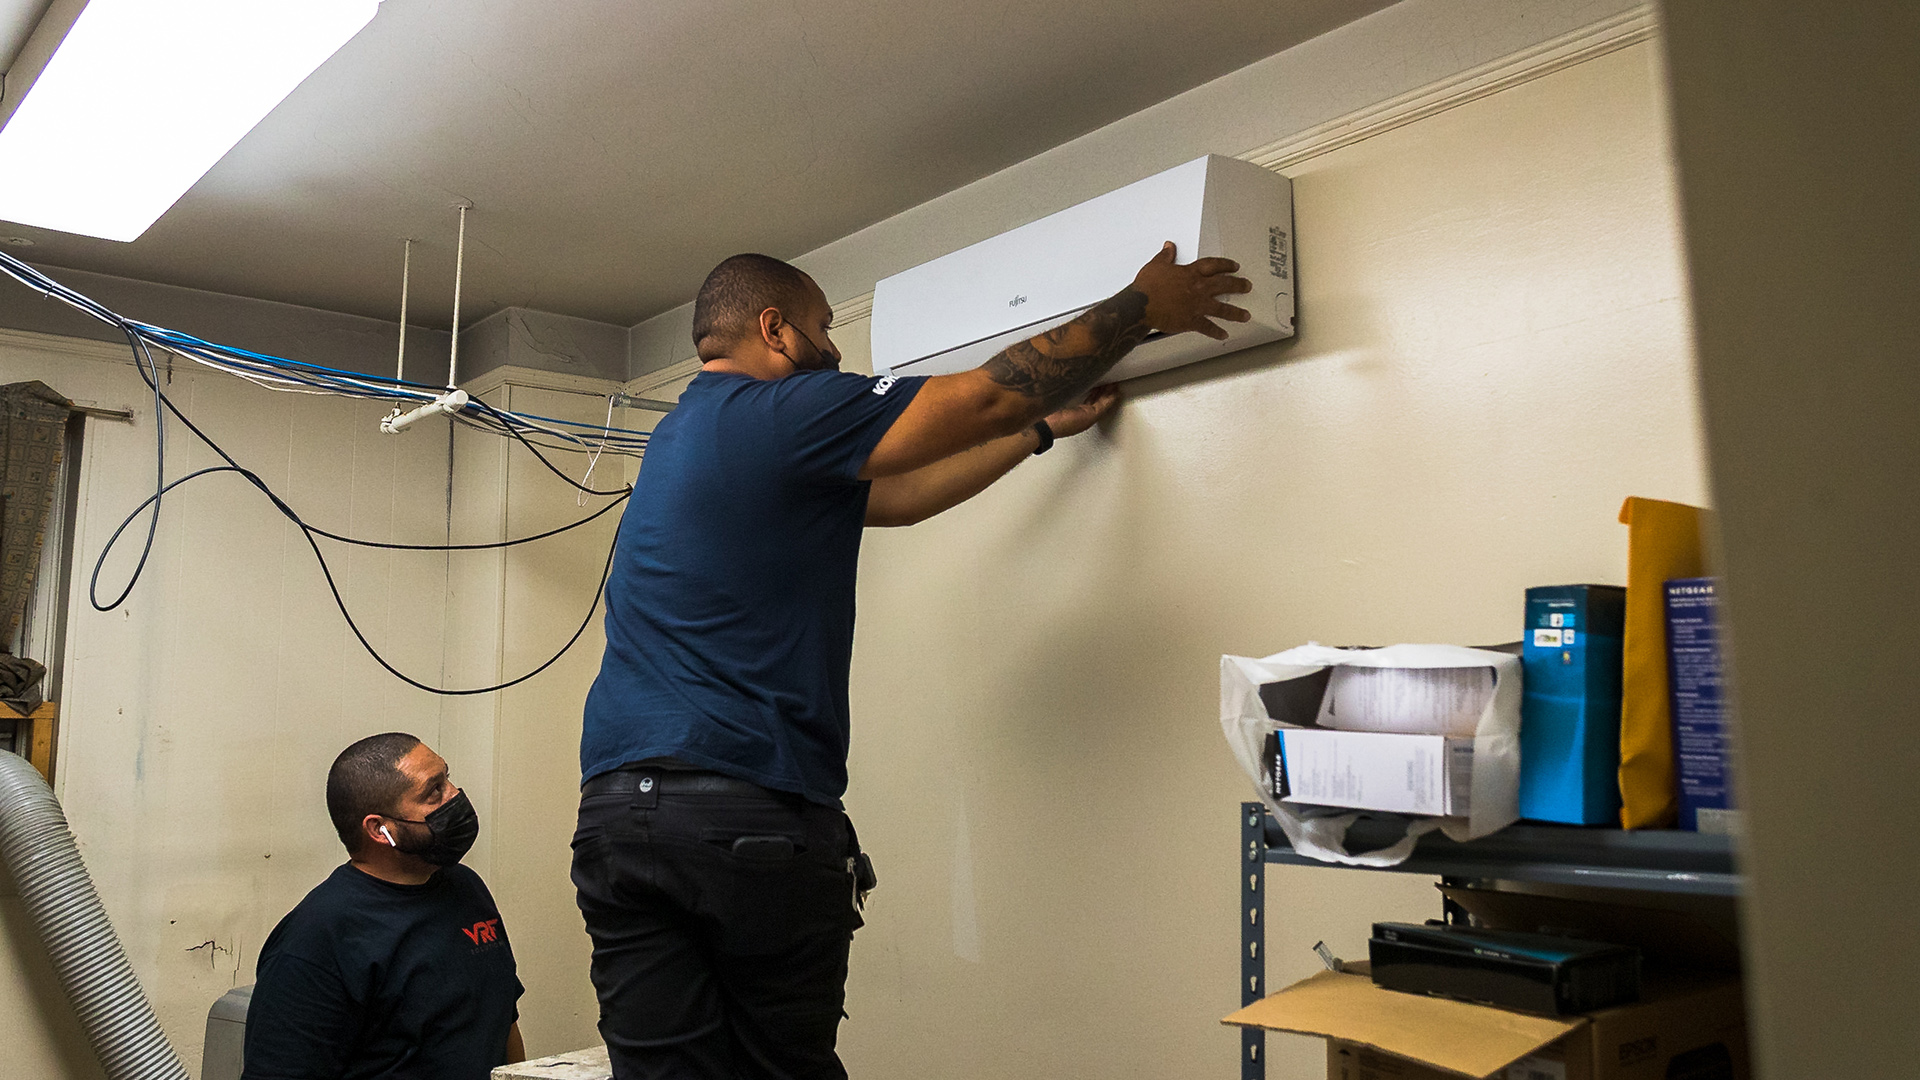 A standing contractor adjusts the placement of a wall-mounted utility appliance inside a building as another contractor watches.